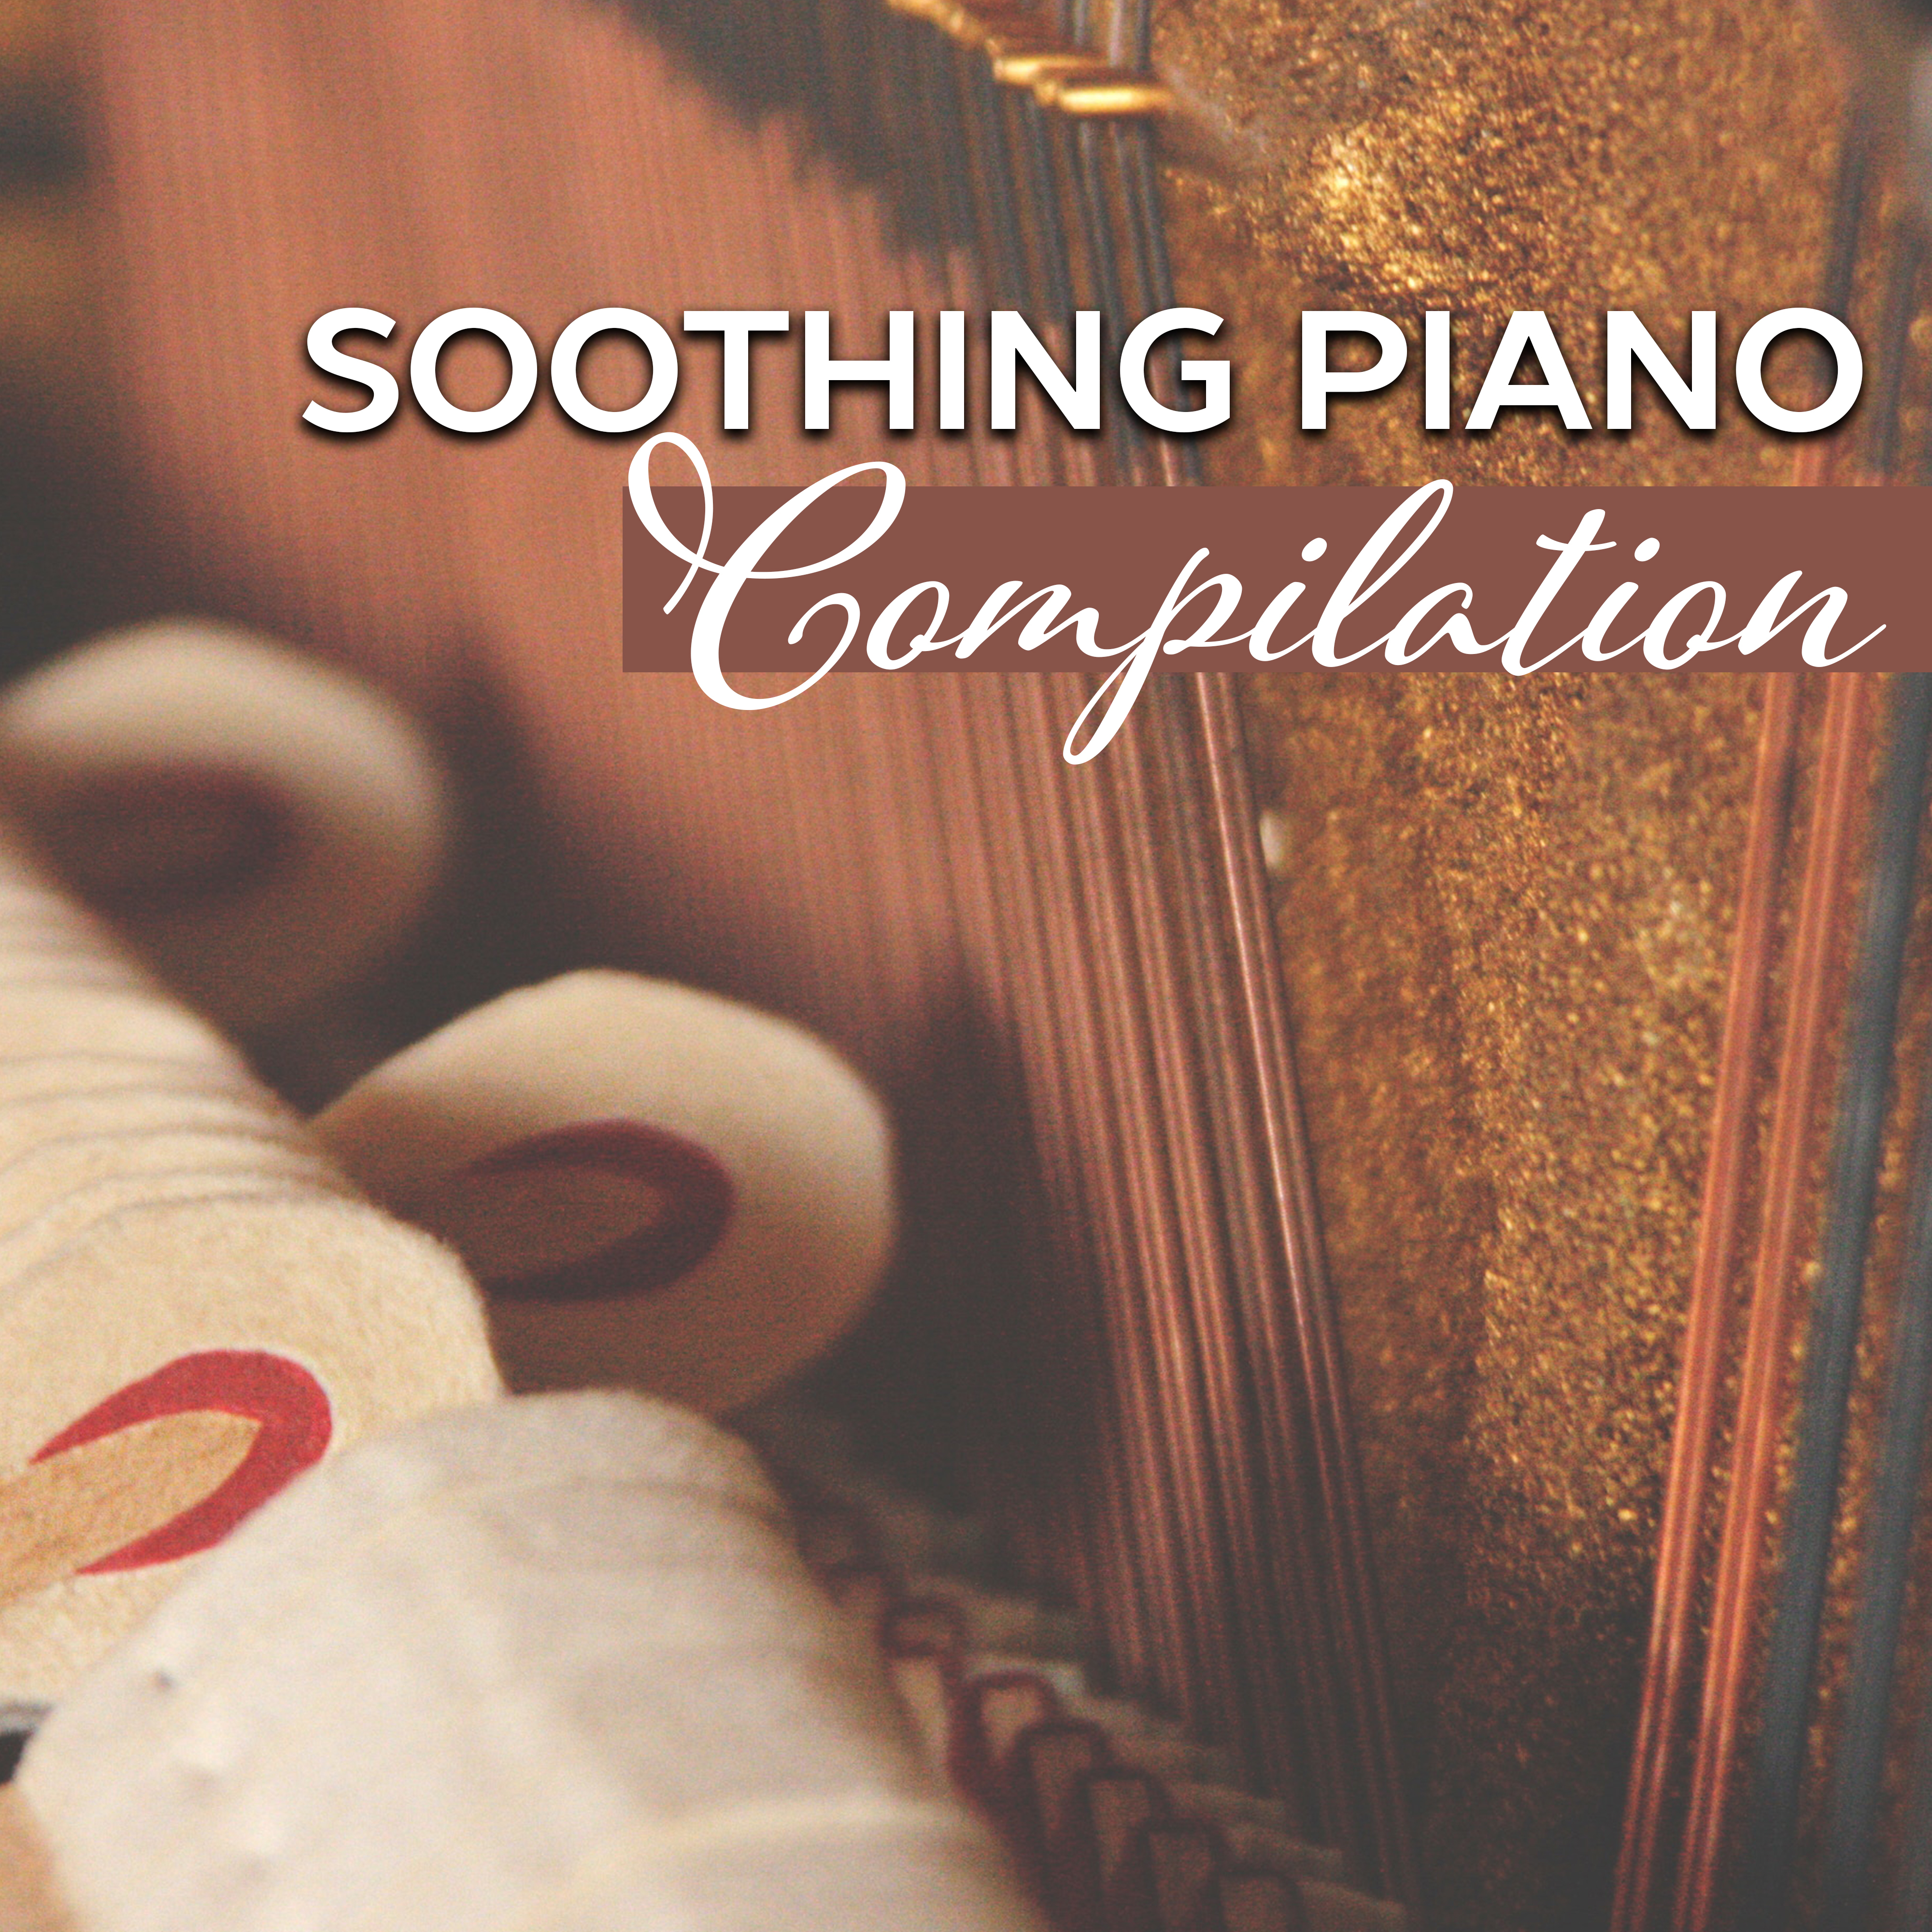 Soothing Piano Compilation